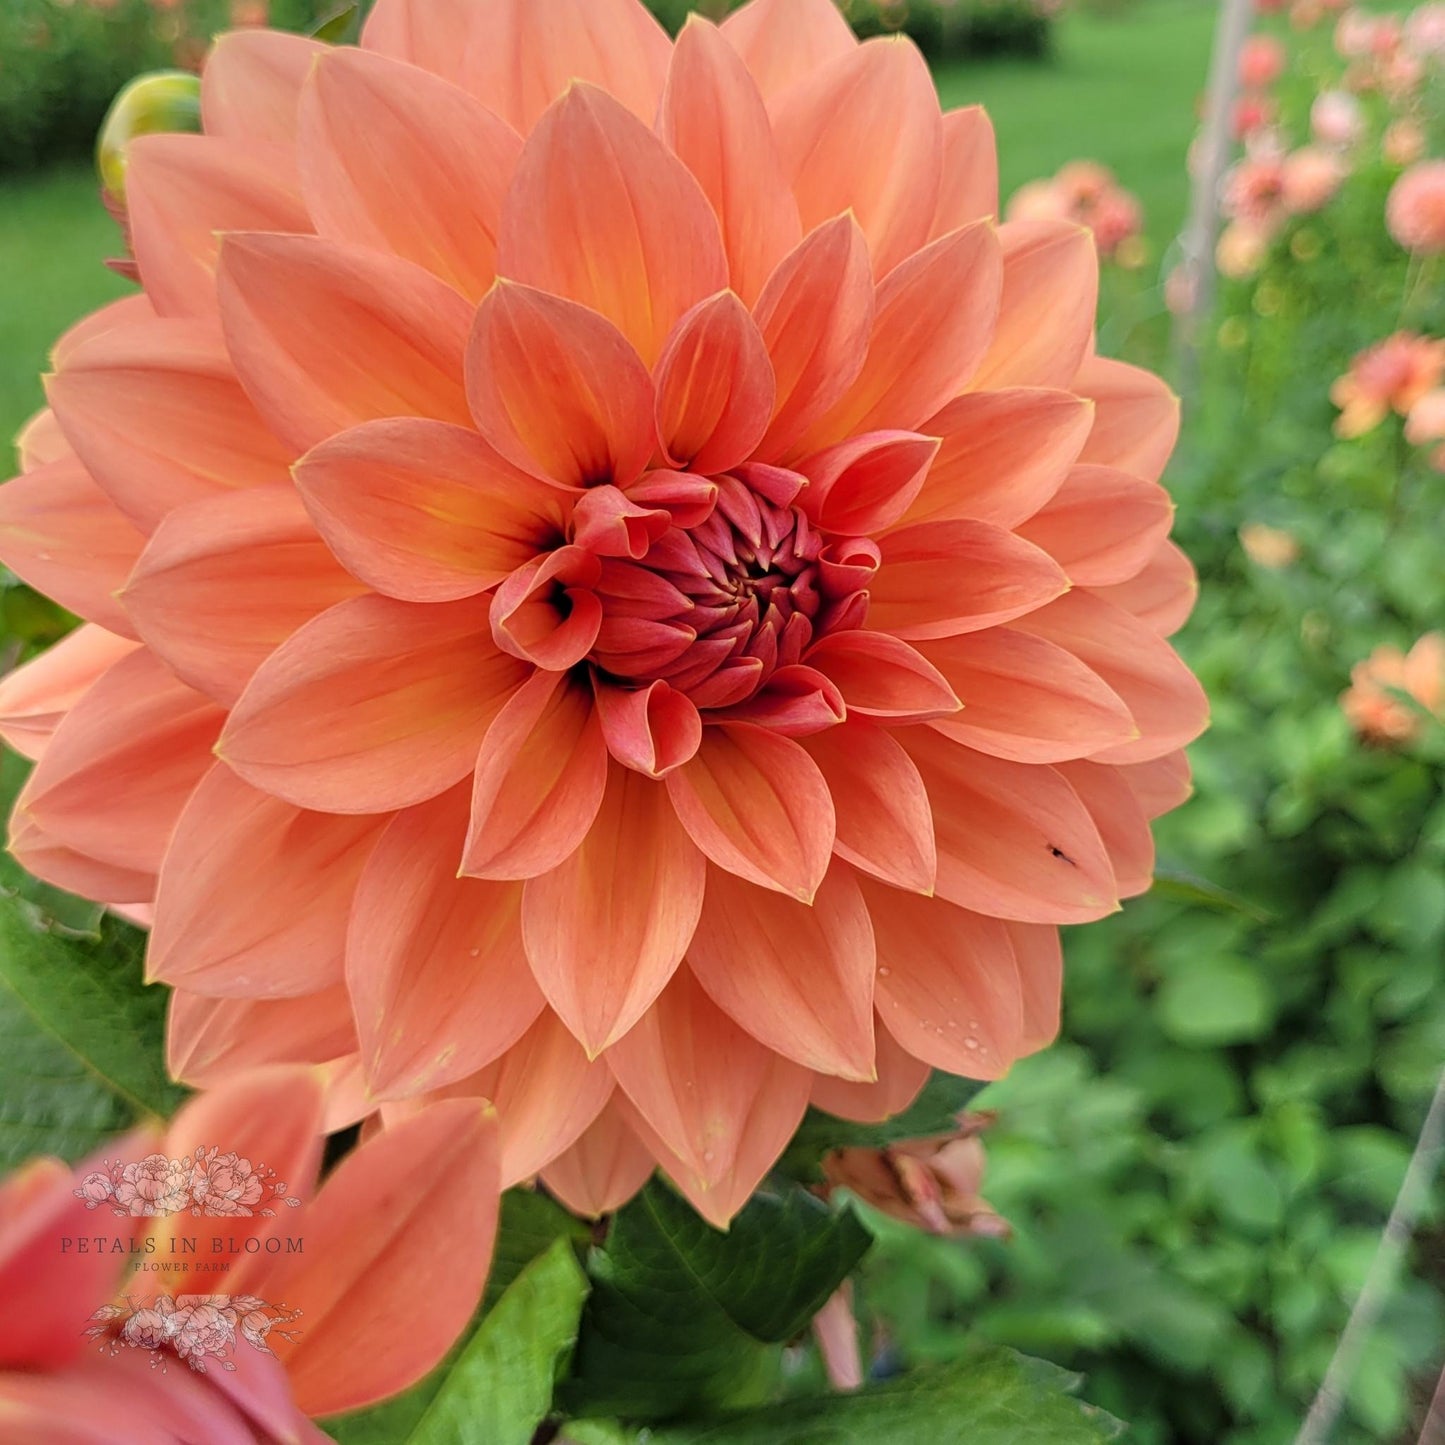 
                  
                    Nicholas Dahlia Tuber in rich cantelope and pink colors at Petals in Bloom Flower Farm
                  
                